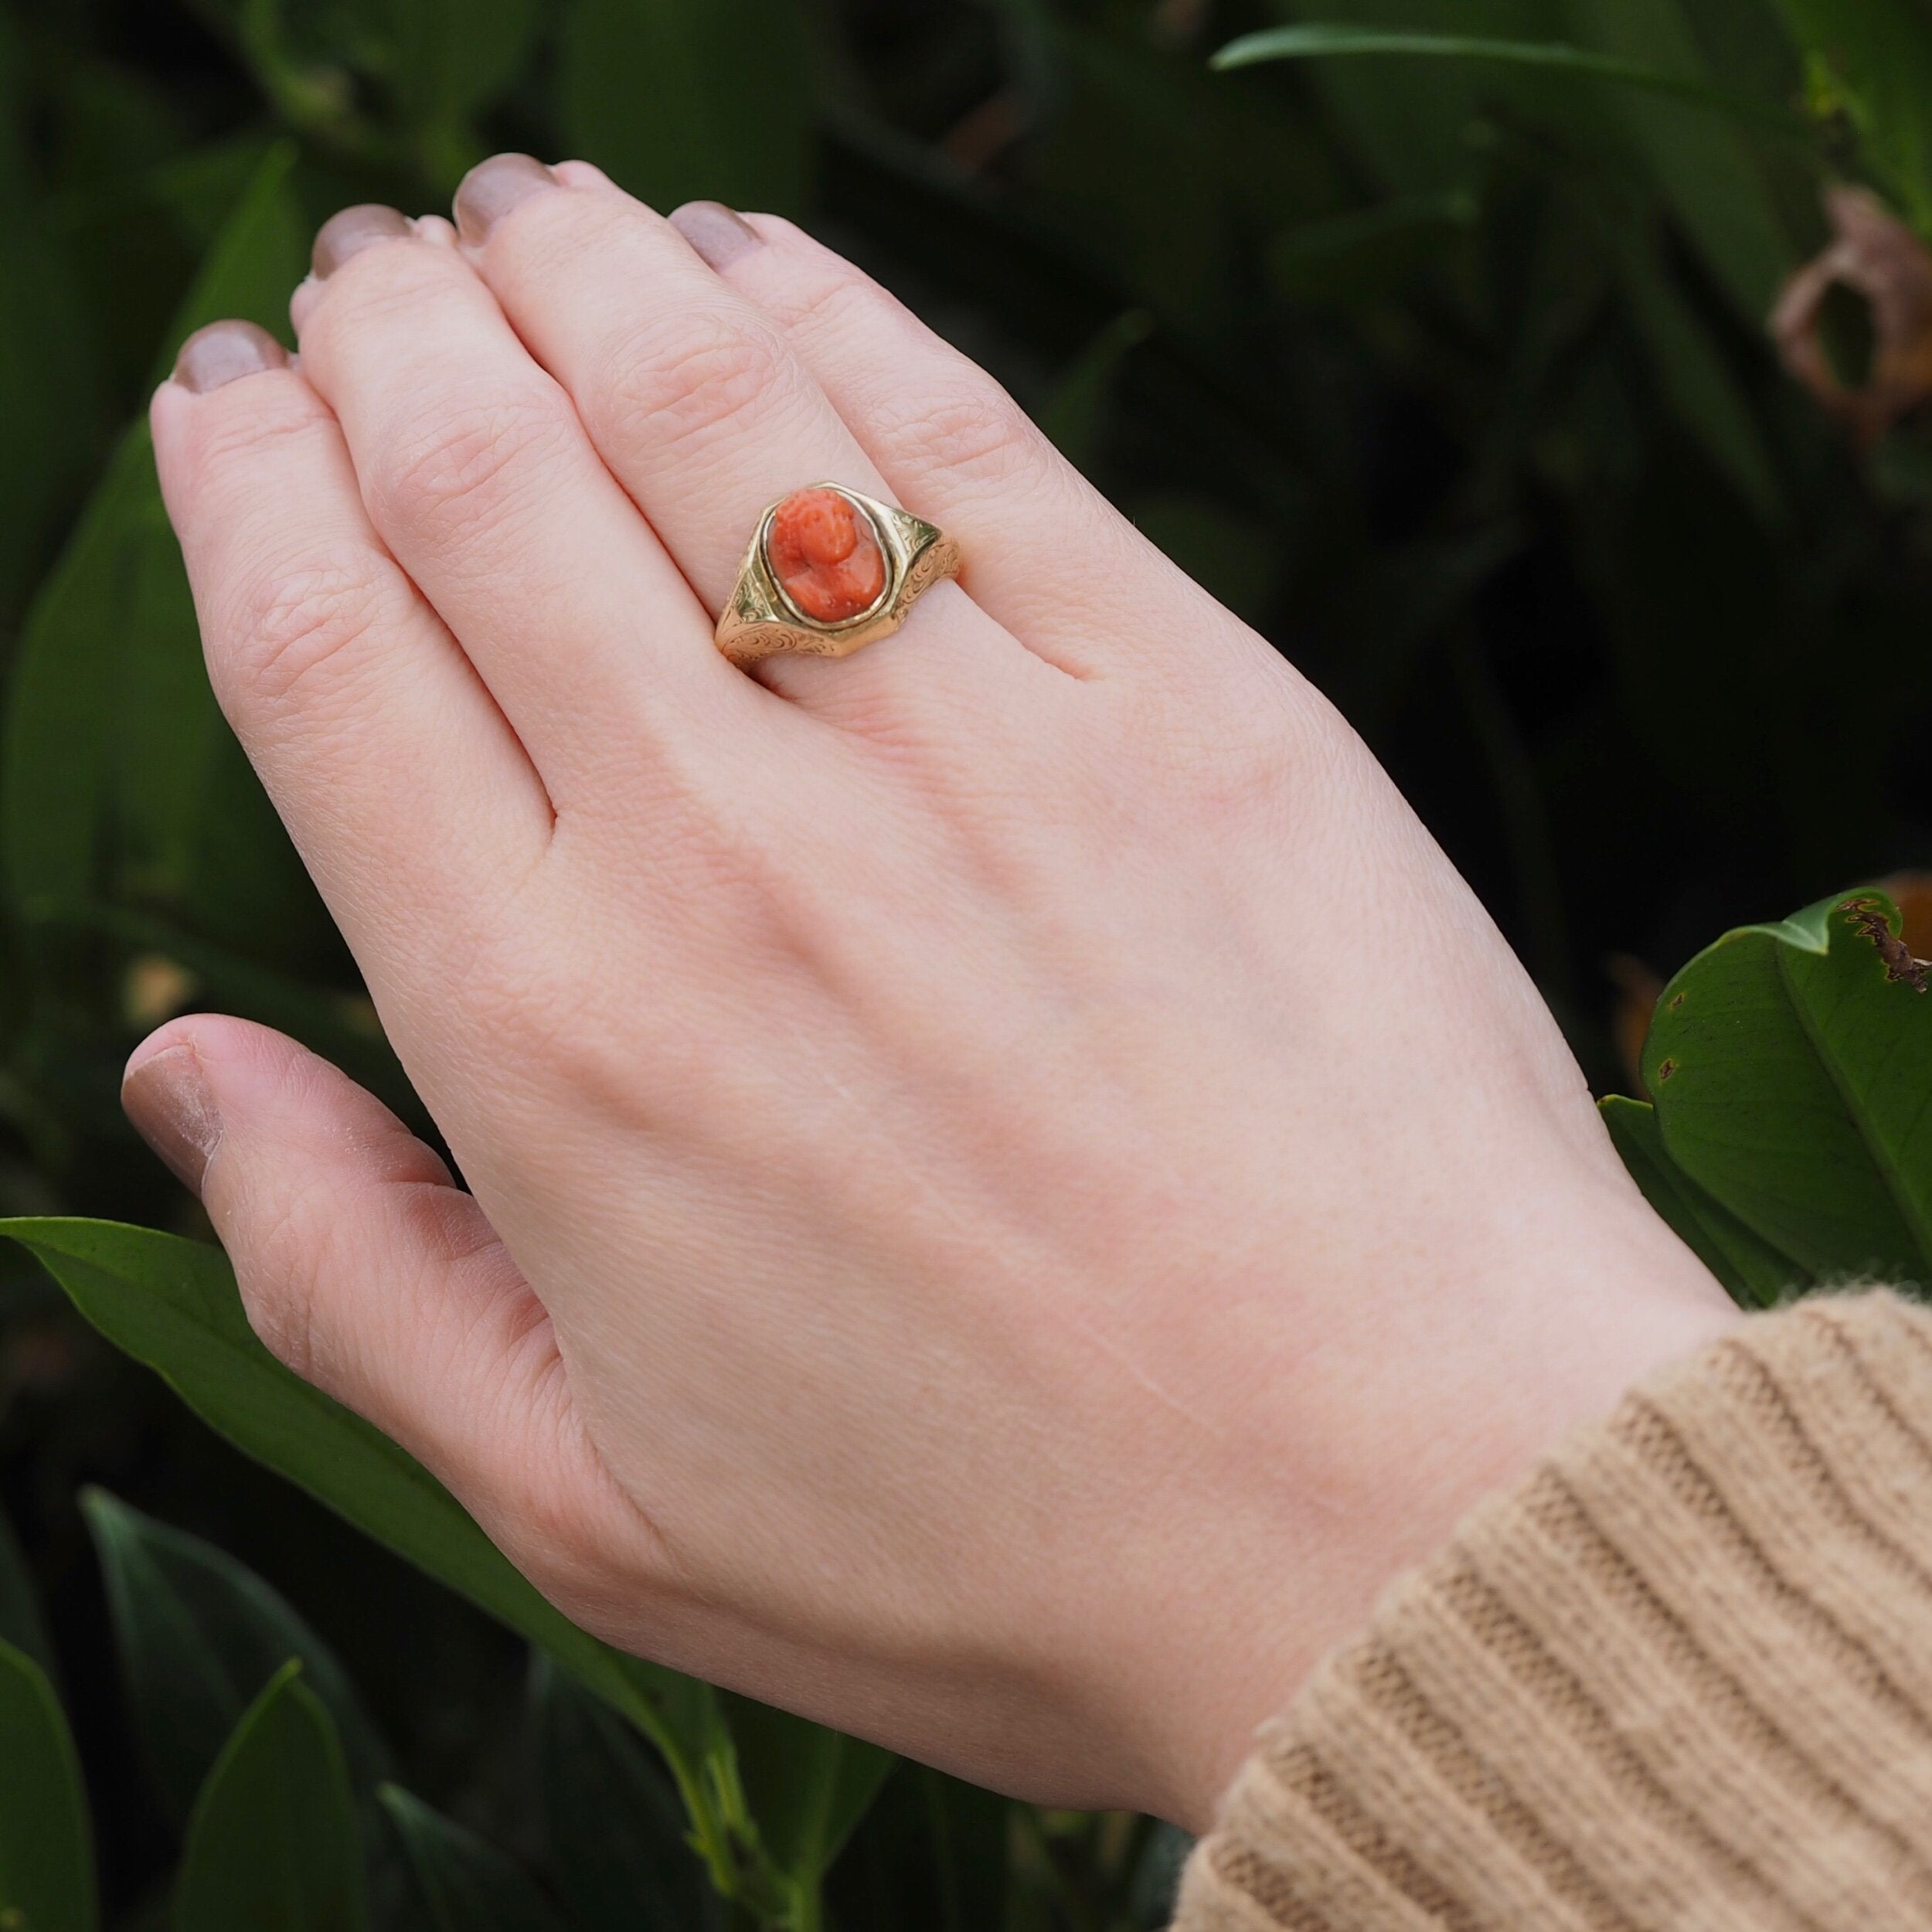 Antique Victorian 14k Gold Coral Cameo Ring